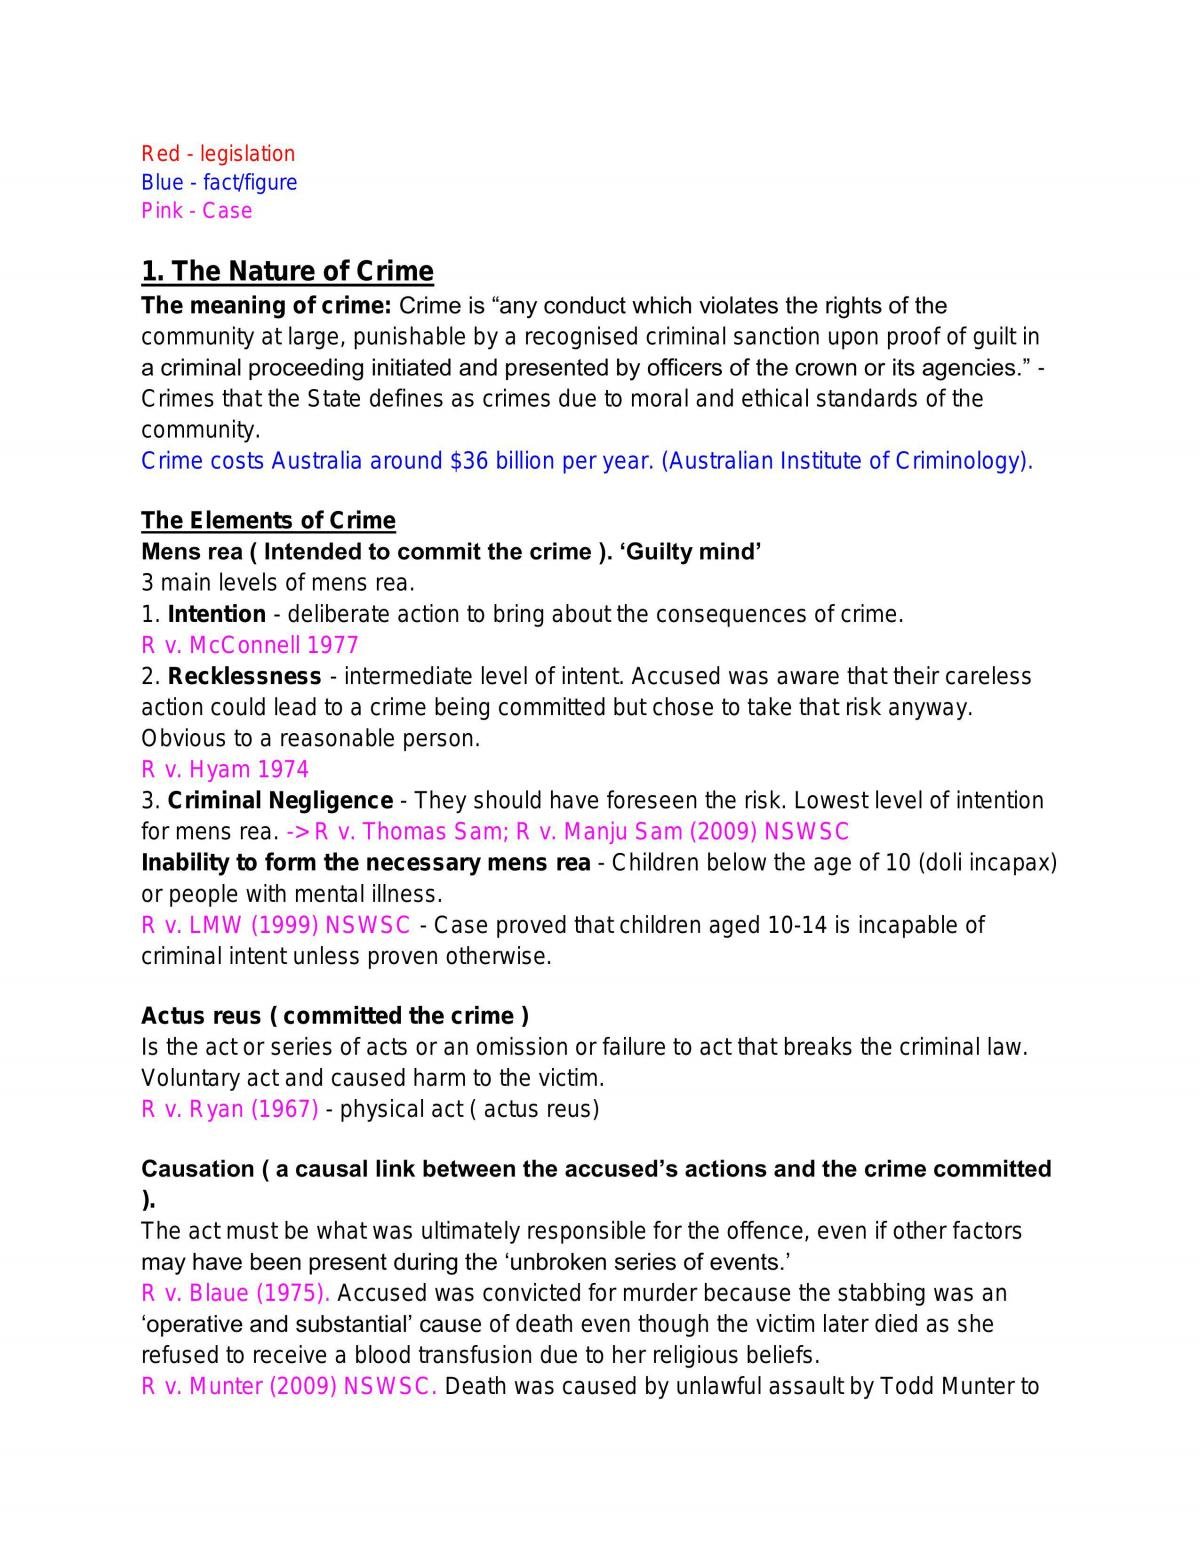 Complete summary notes on the topic of Crime - Page 1